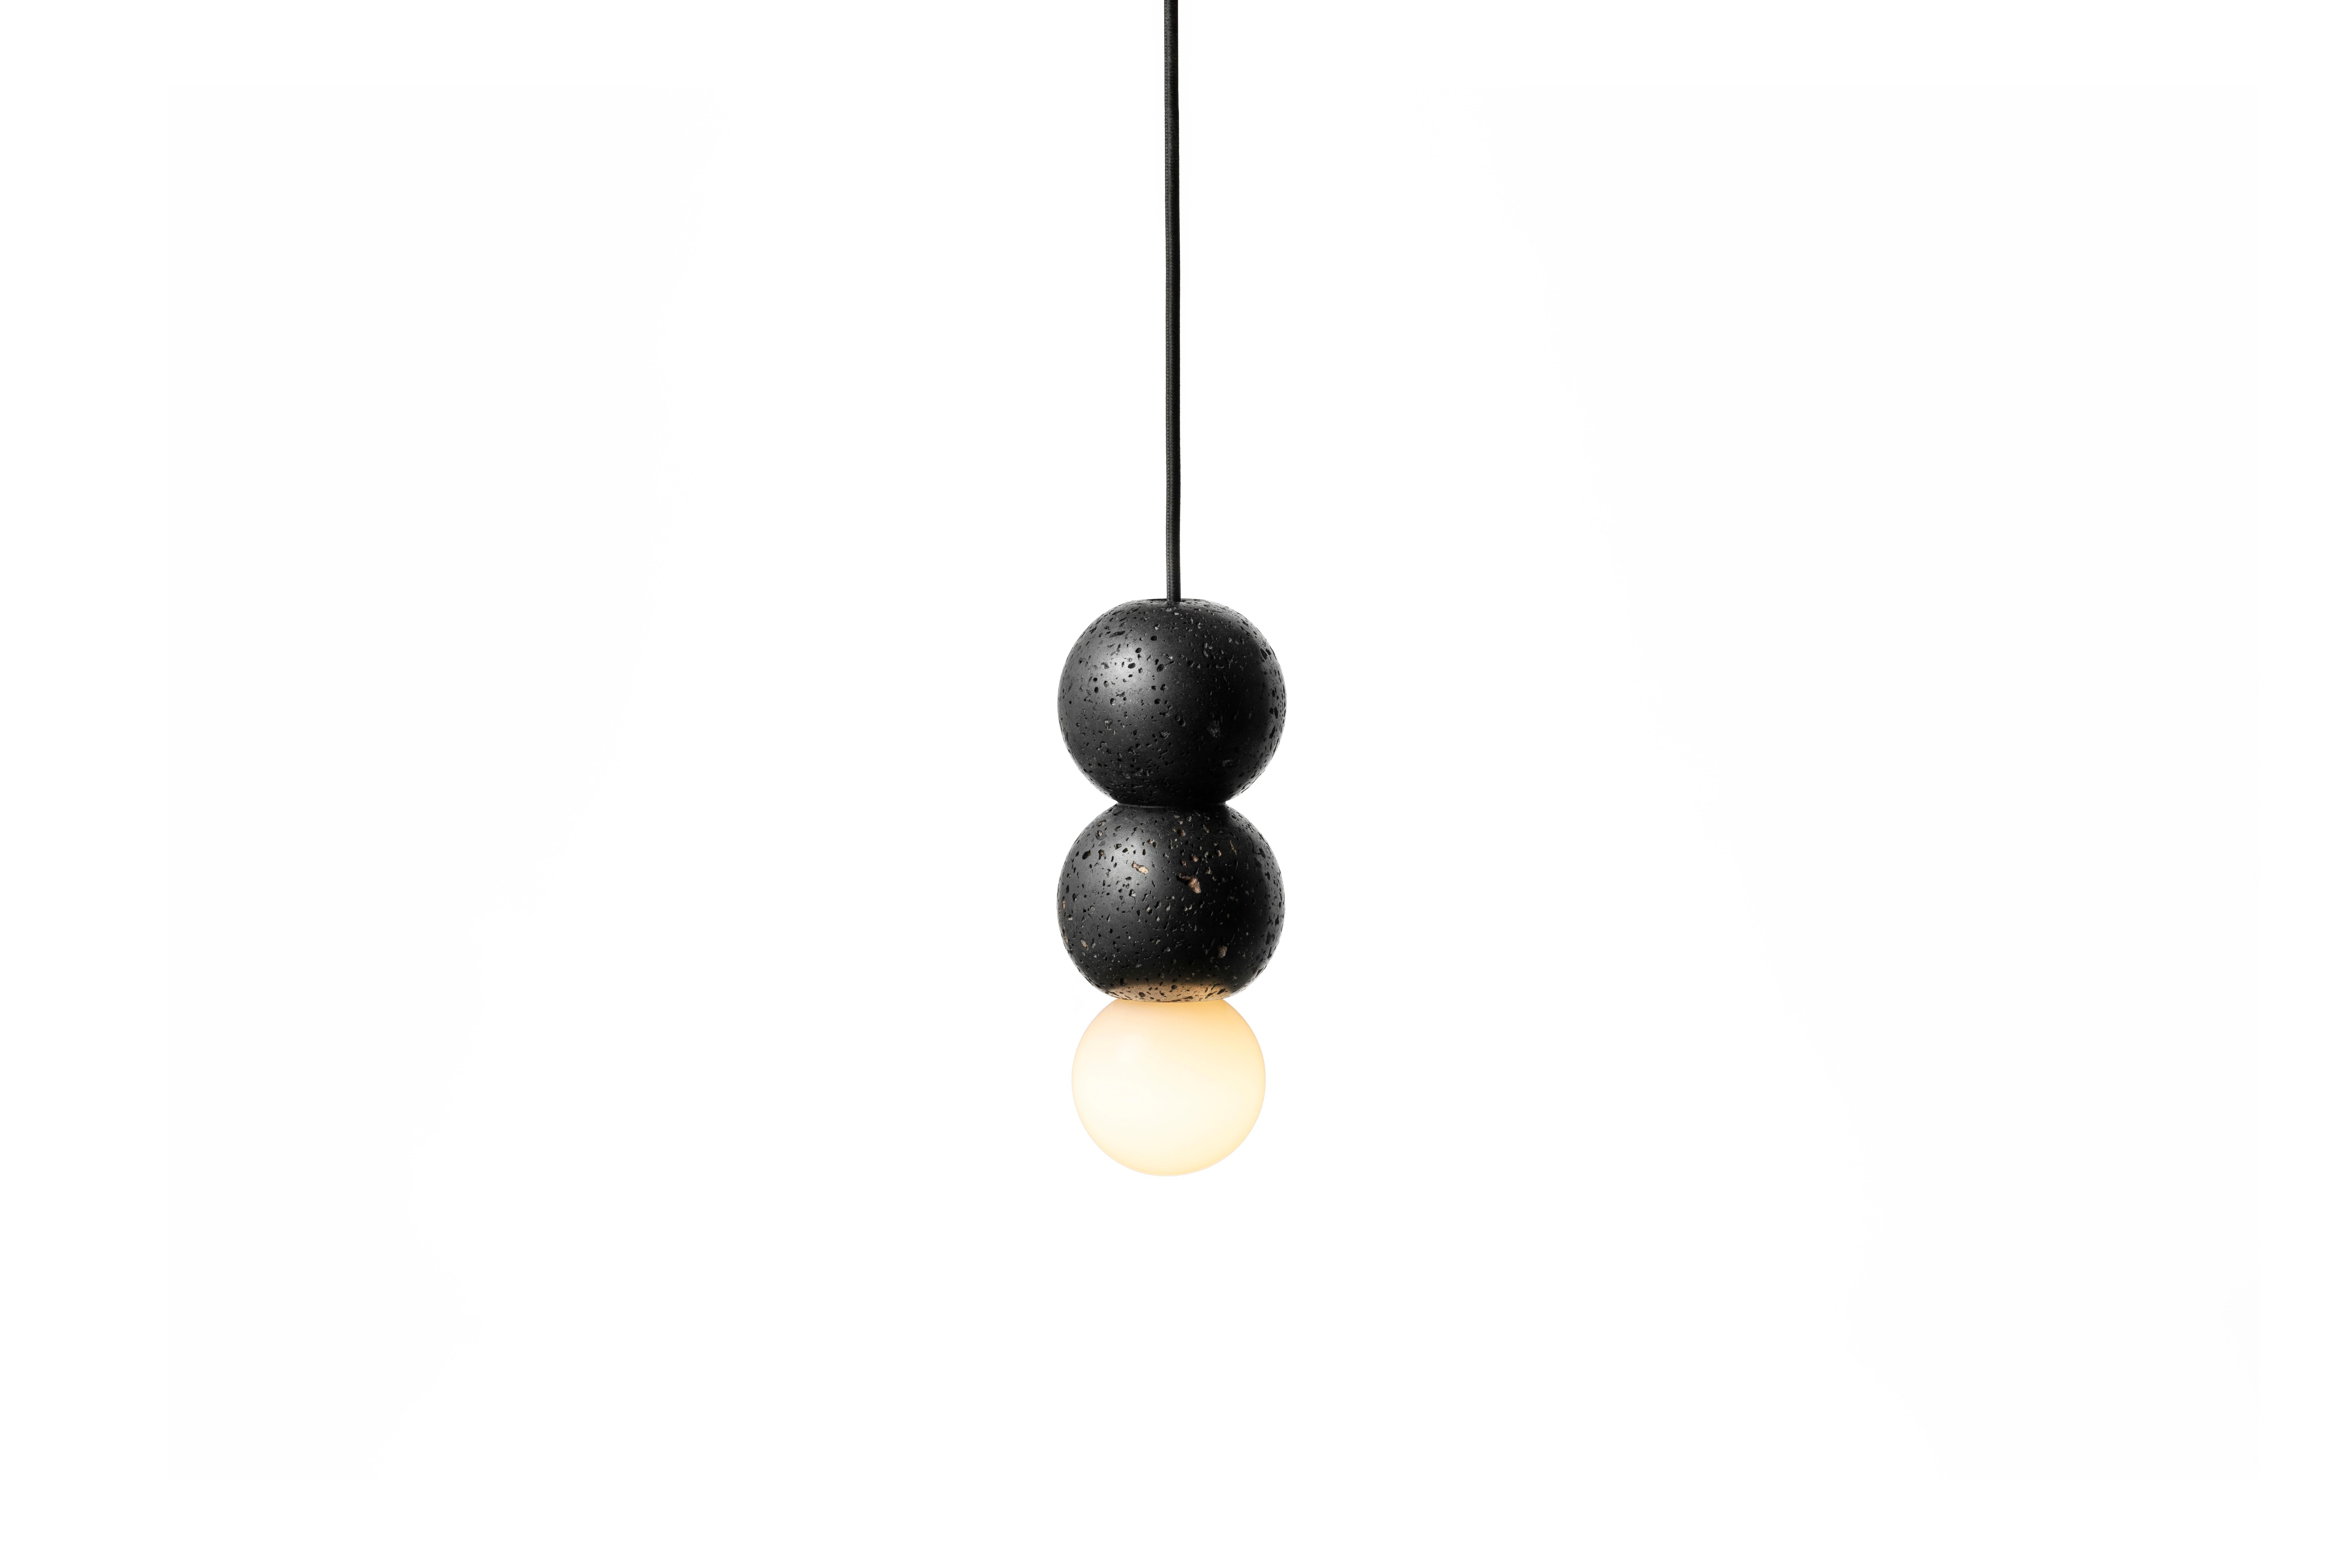 Pendant lamp 'OOPS' by Buzao x Bentu design.
Black lava stone

Measures: 24 cm high, 9 cm diameter
Wire: 2 meters black (adjustable) 
Lamp type: E27 LED 3W 100-240V 80Ra 200LM 2700K - Comptable with US electric system.
Ceiling rose: 6.5cm diameter